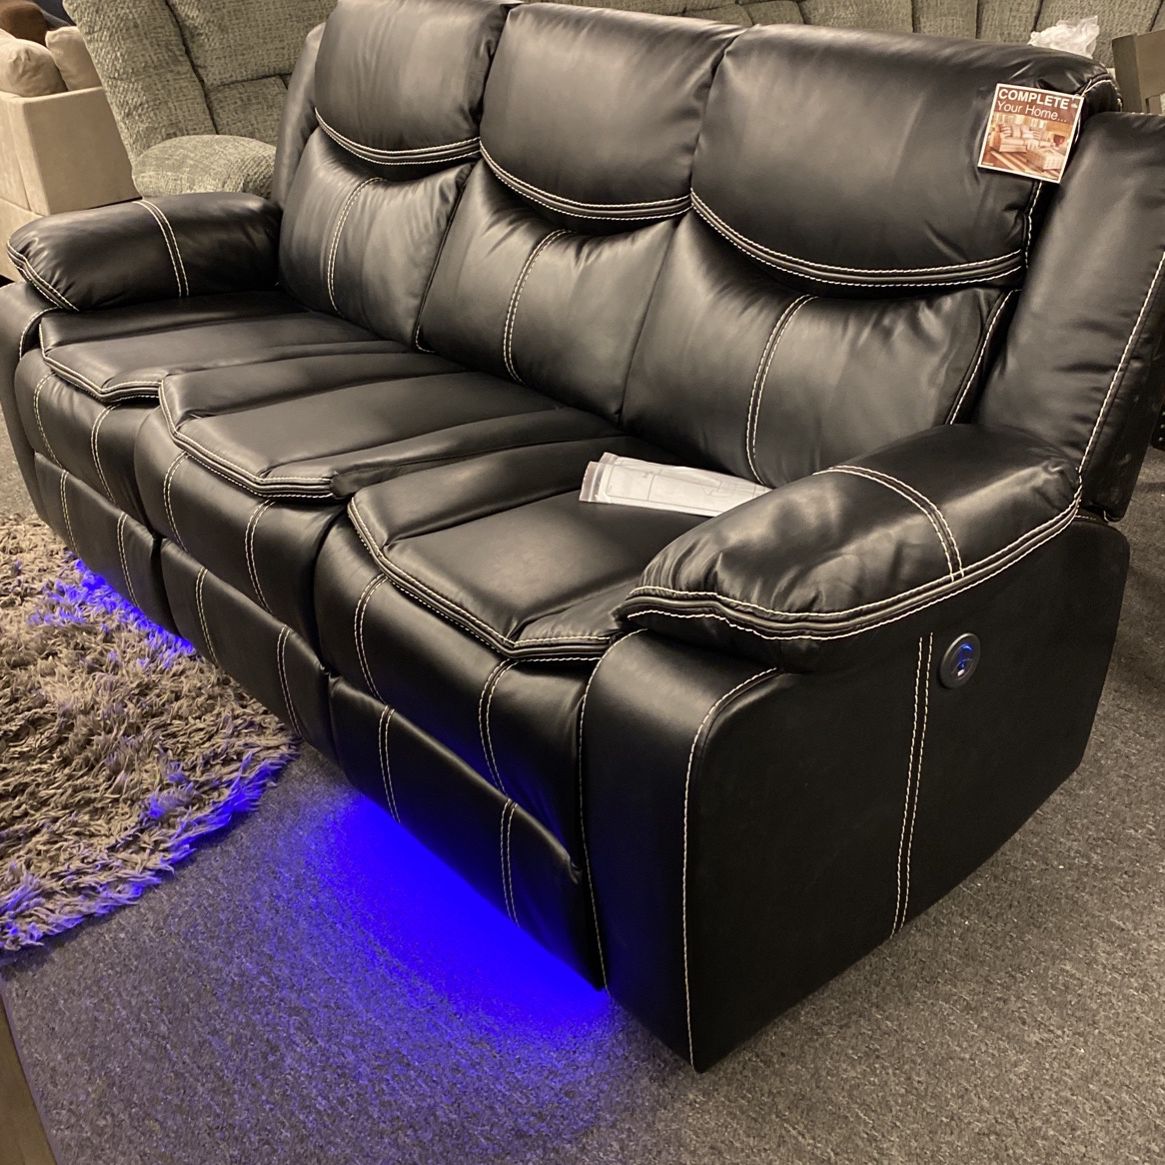 Brand New Clearance Power Black Recliner With Usb And Led Lights. Two Sofas Clearance Priced At 1699 Was 2700.